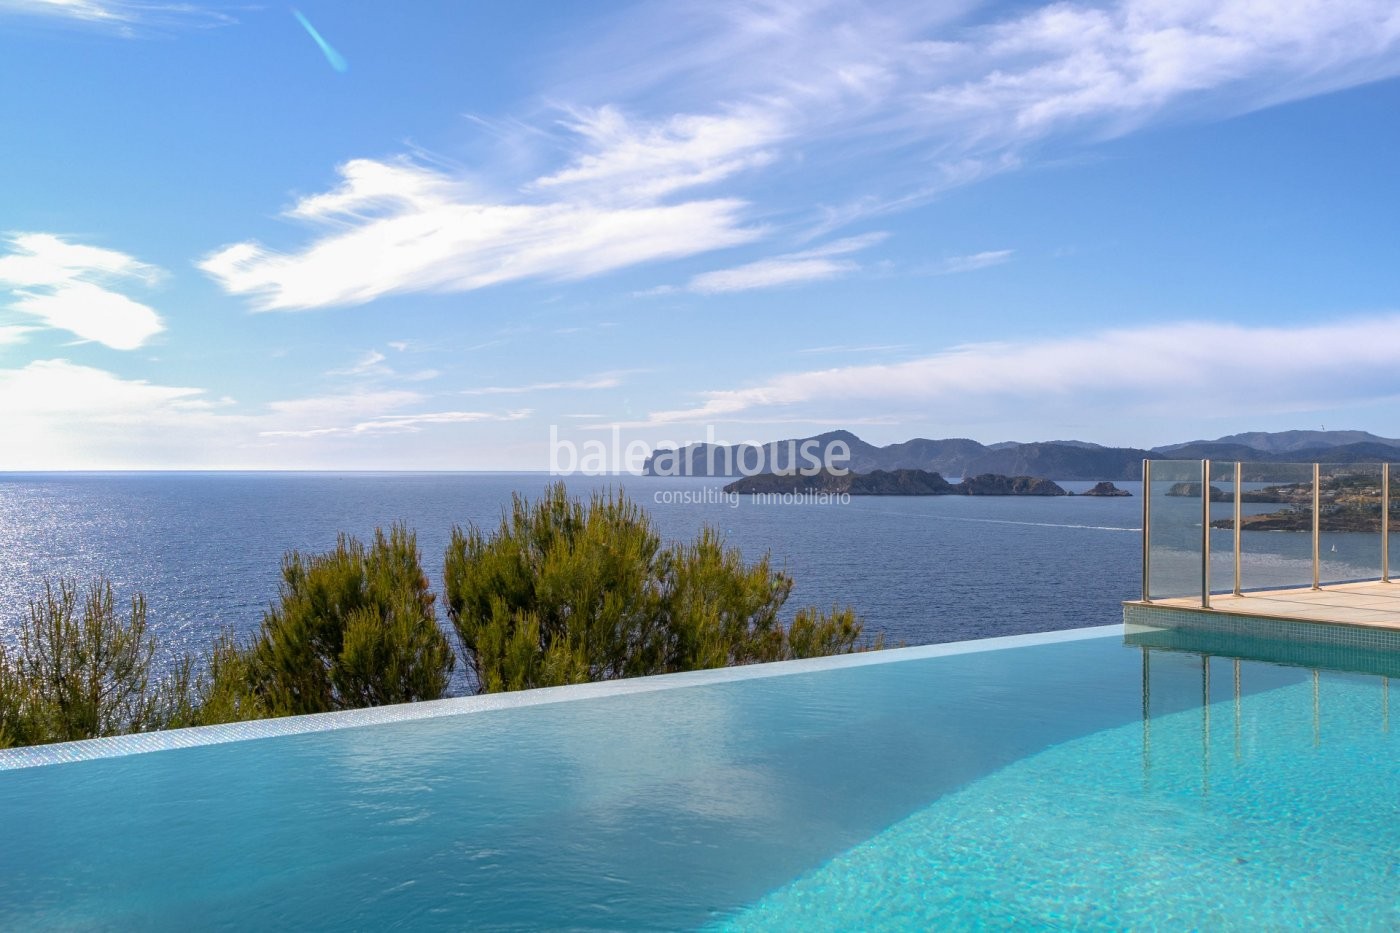 Seafront villa in Port Adriano designed as a spectacular viewpoint overlooking the Mediterranean.